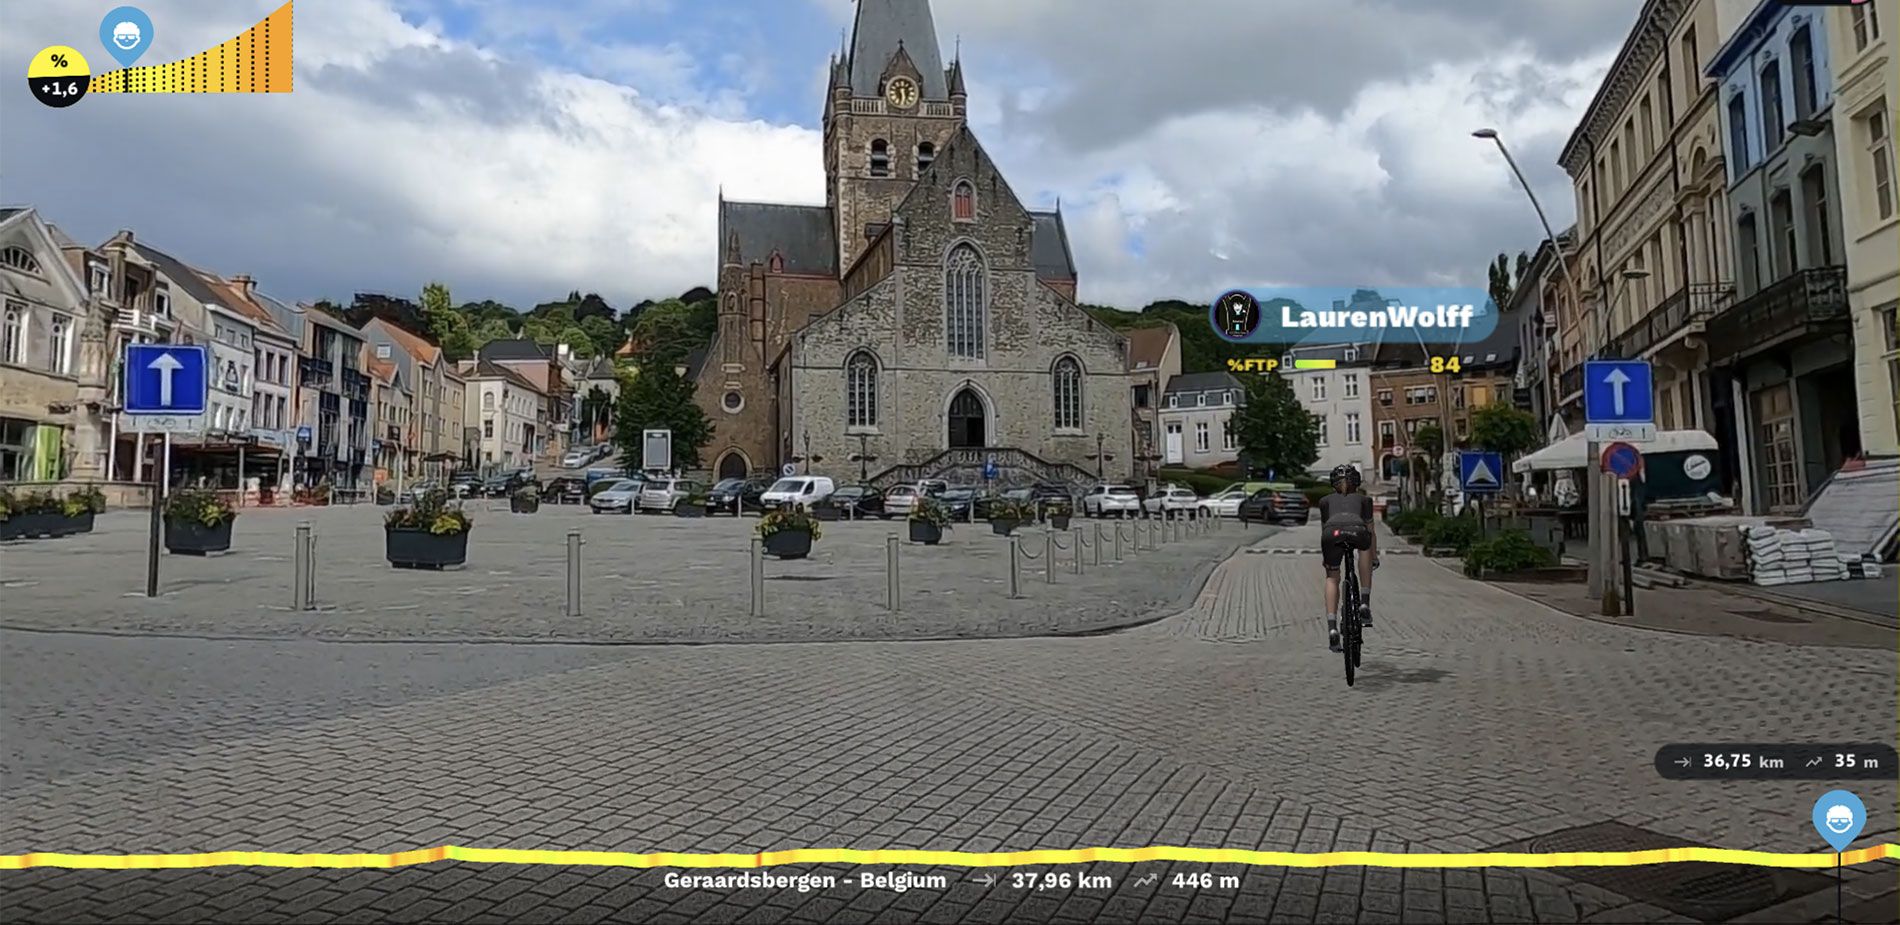 The start of the climb begins from the town centre in Geraardsbergen (above)